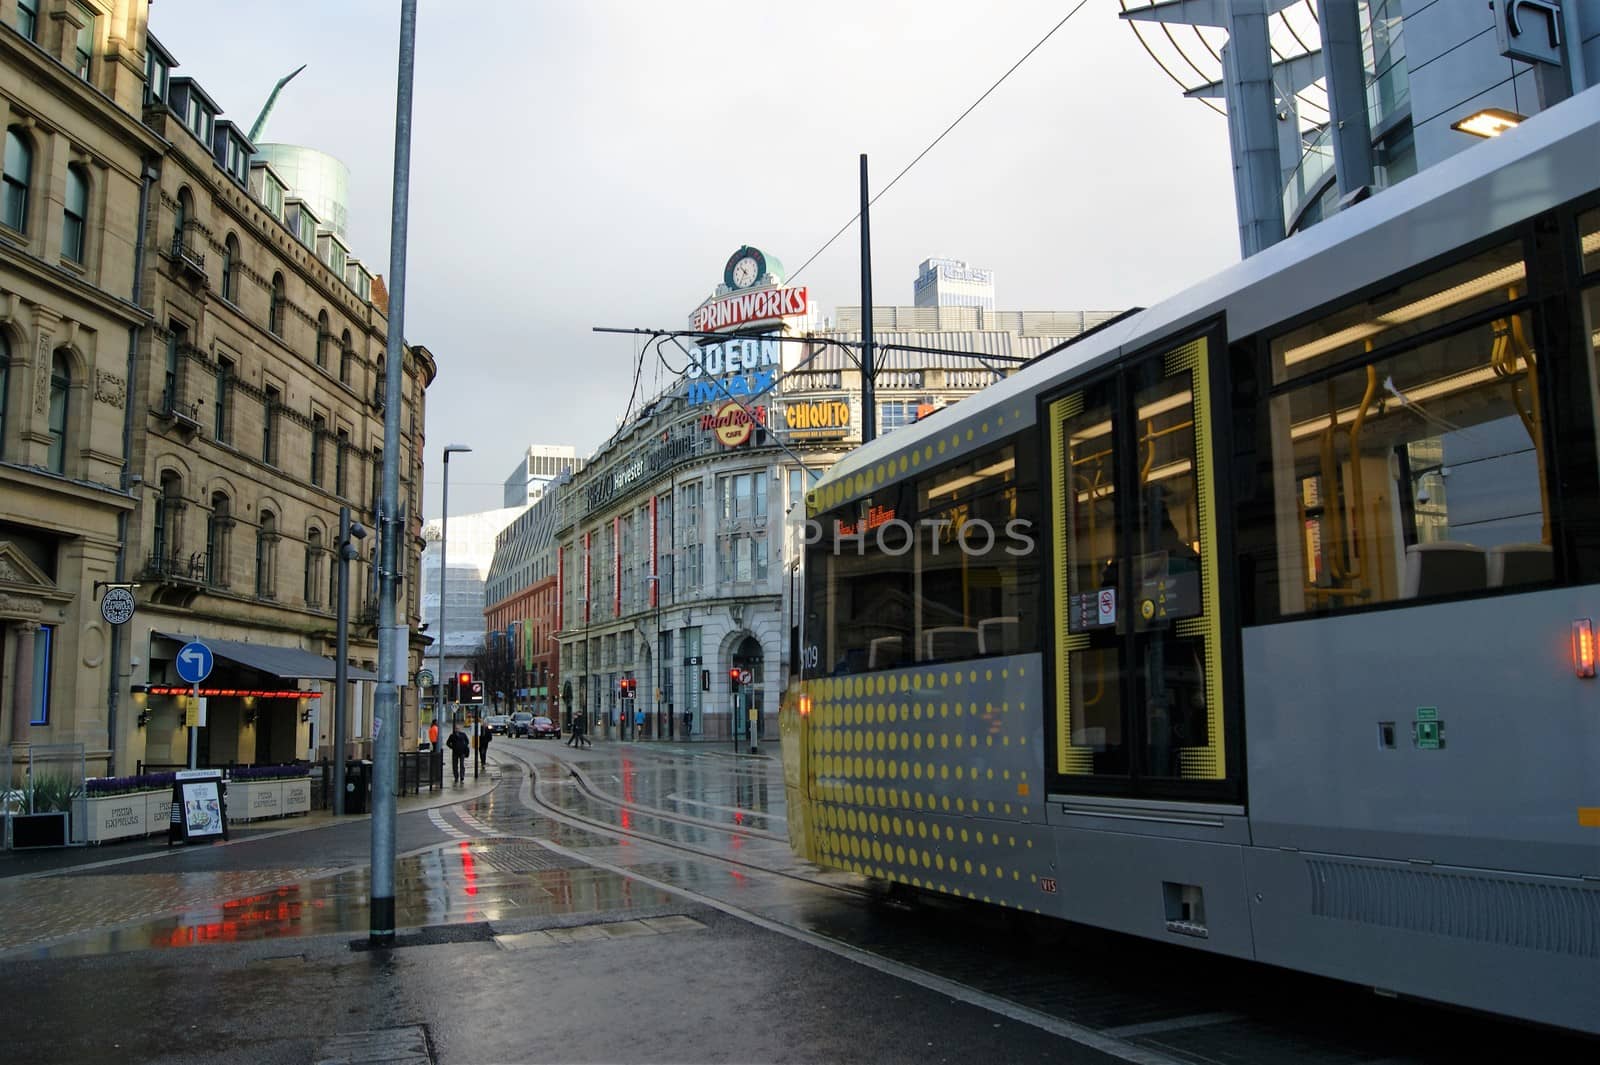 A close-up image of an electric tram in the city of Manchester.